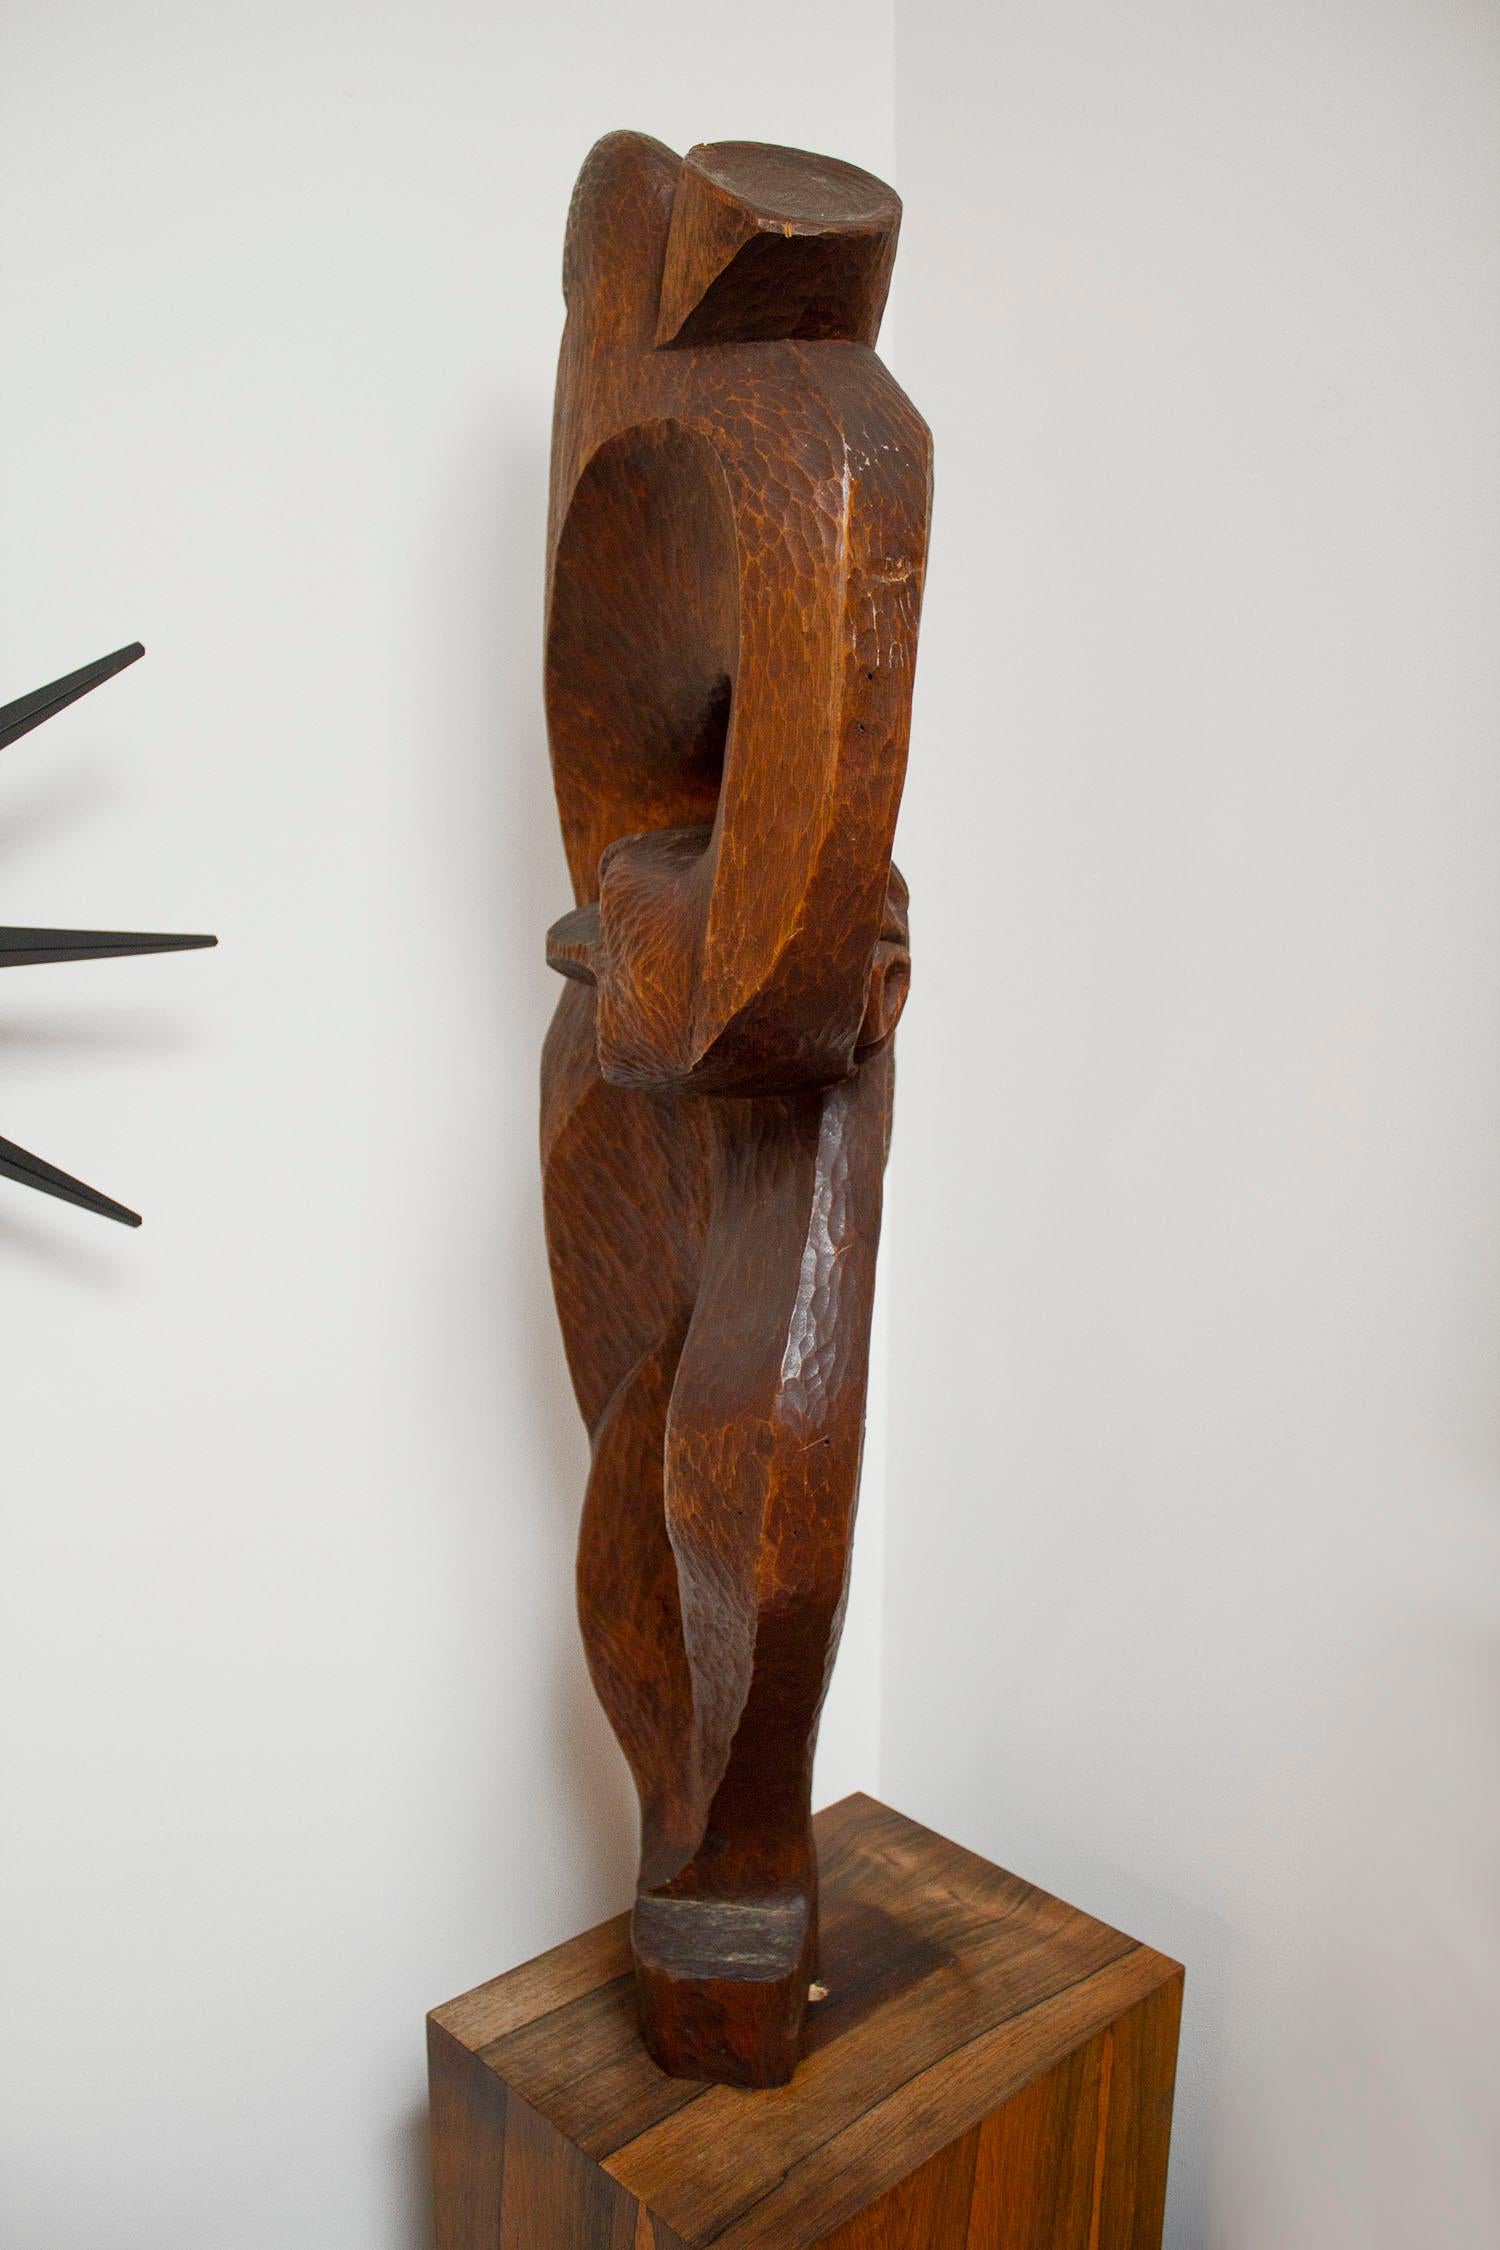 Figurative Mahogany Sculpture Mid-Century Modern 1950s Brazilian Abstract For Sale 2